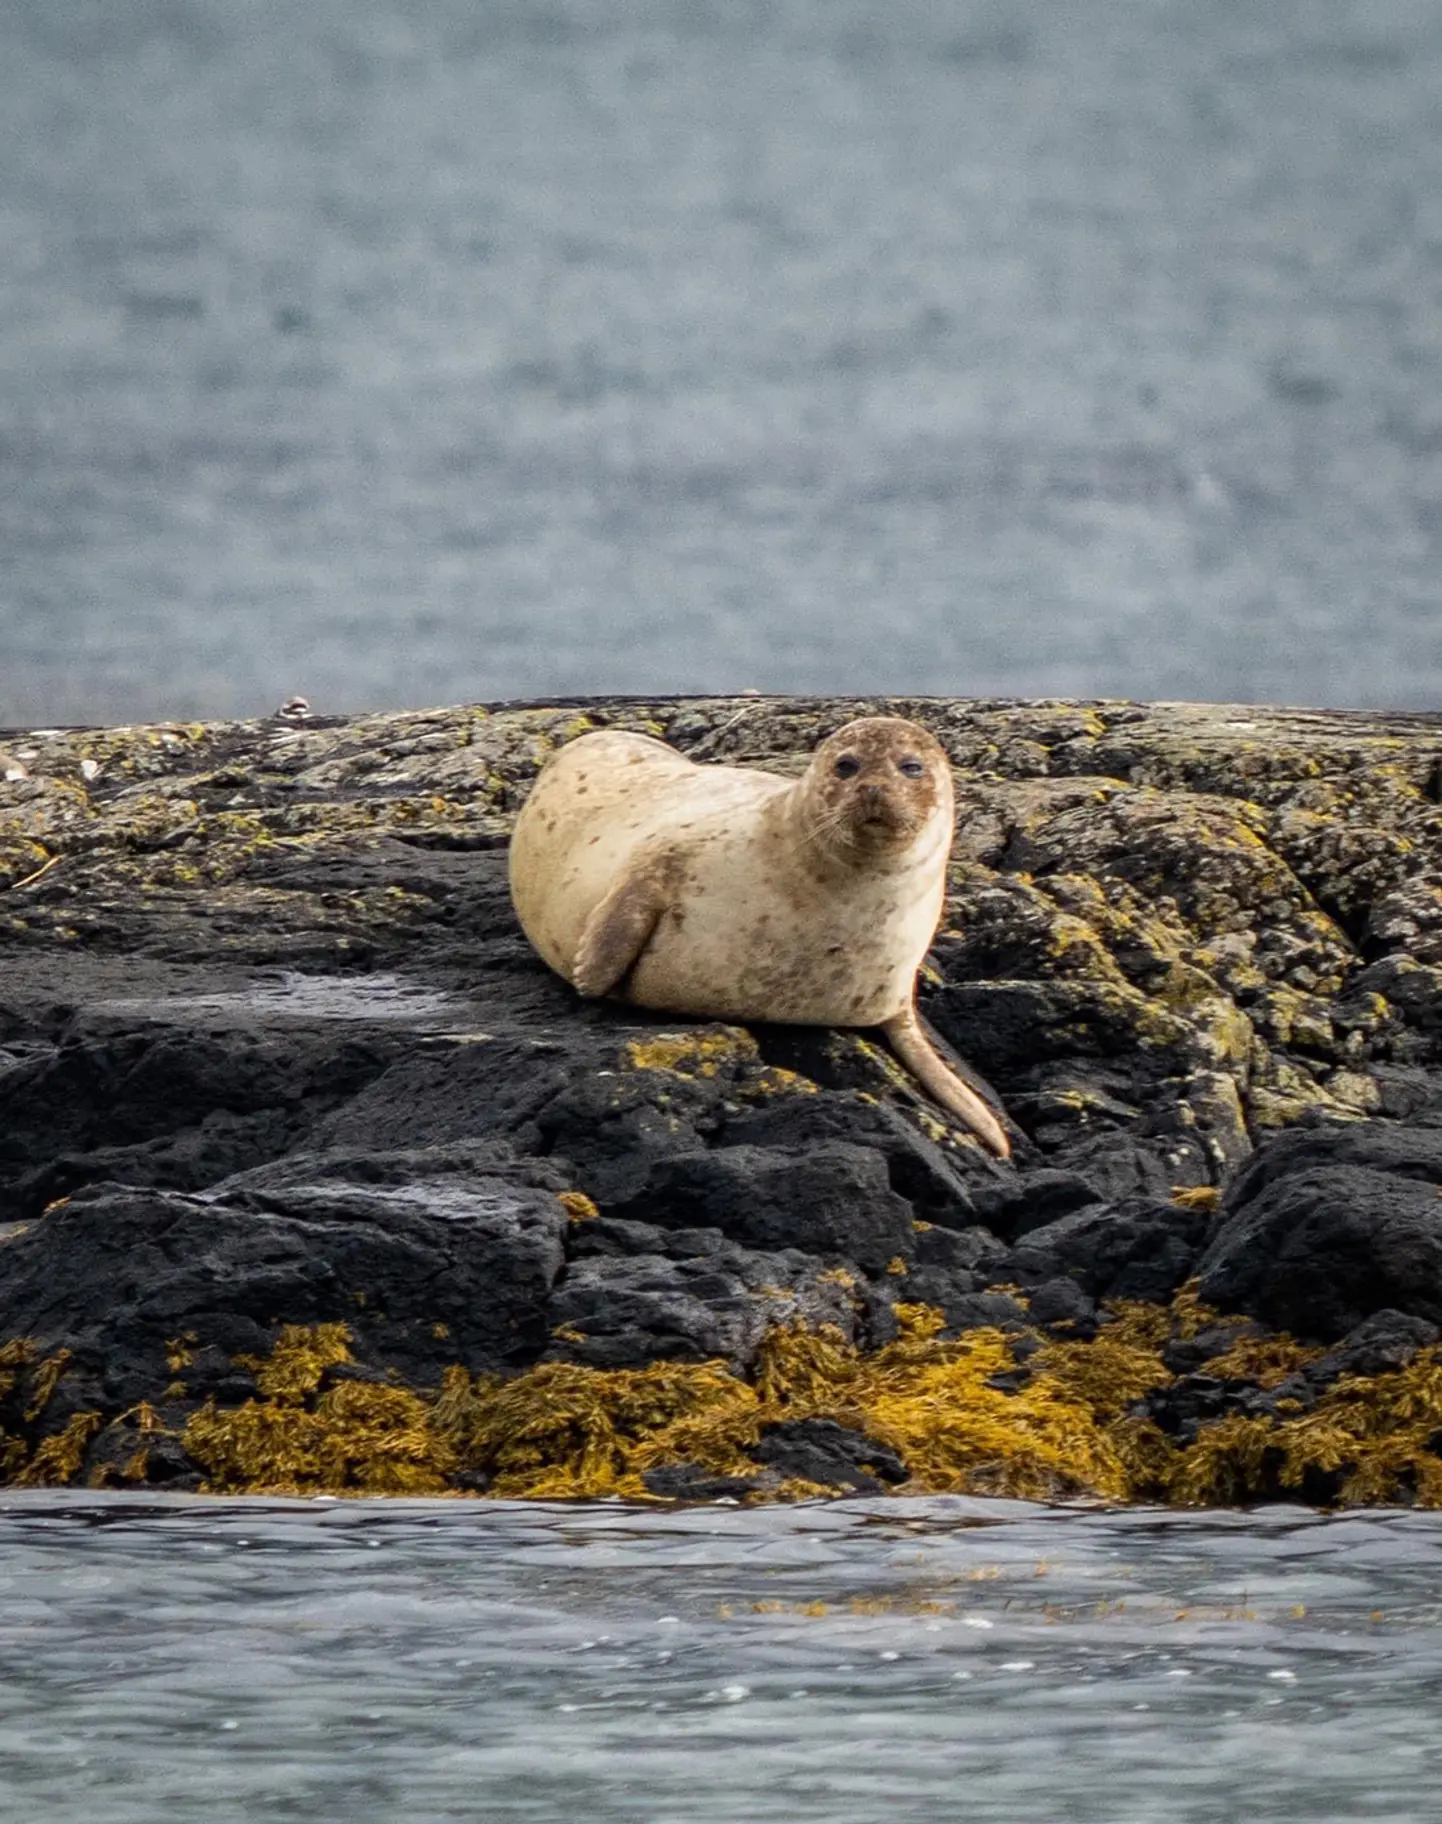 A powdery-looking, taupe coloured seal sat on top of a grey sea rock that’s covered in yellow lichen, watching the photographer. One front fin is outstretched on the rock, the other tucked into the body. The sea around looks dark but calm.